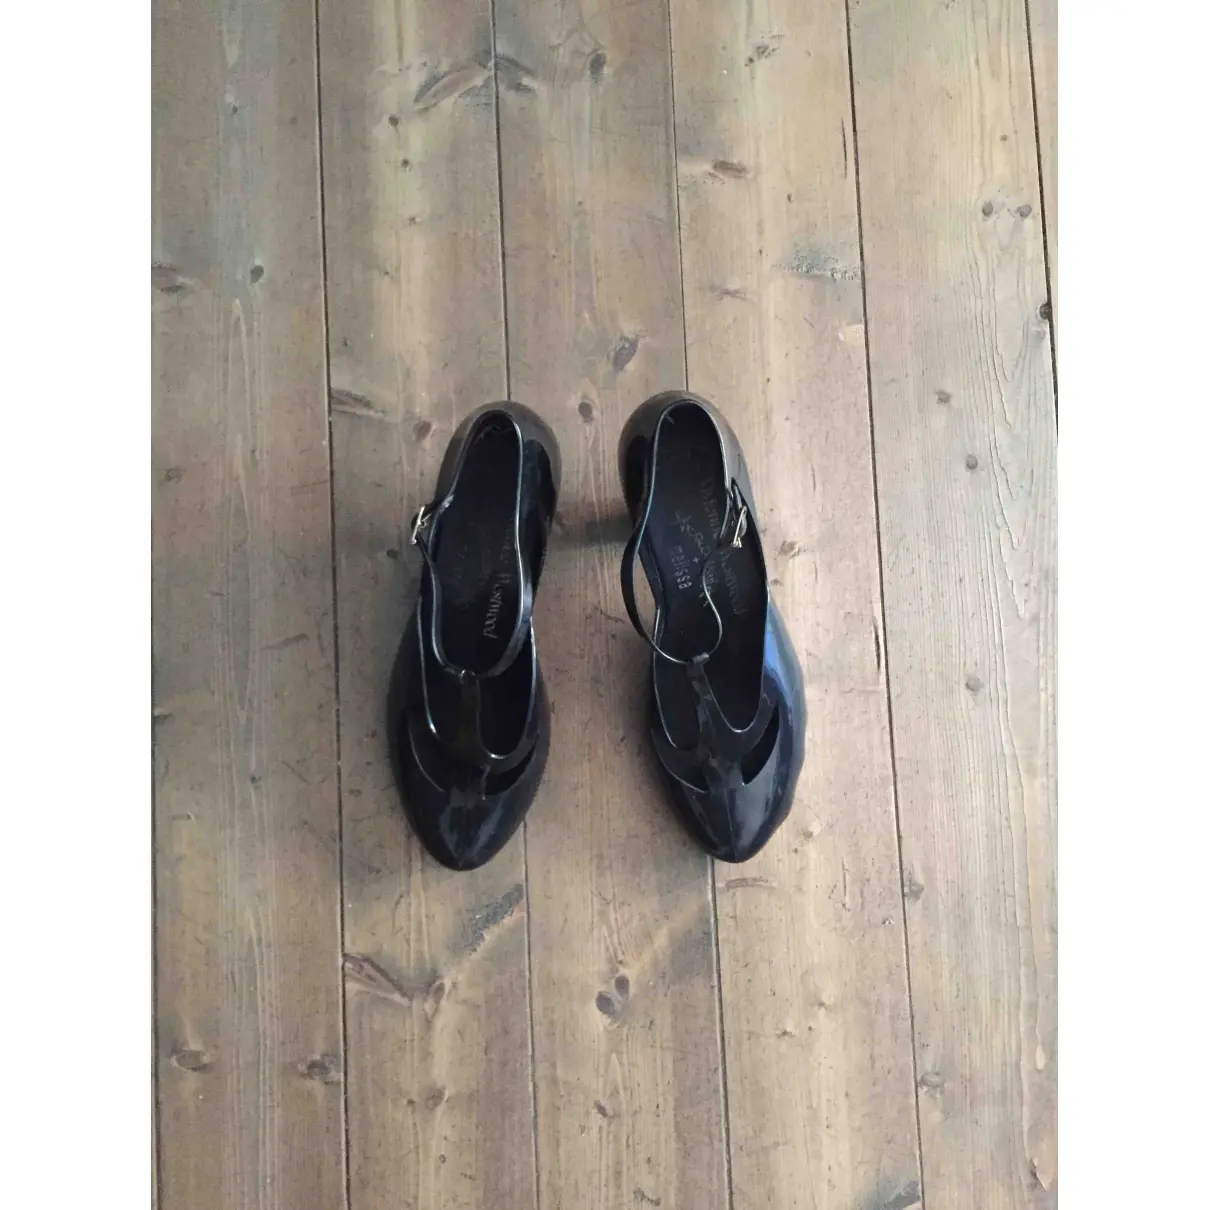 Vivienne Westwood Anglomania Heels for sale